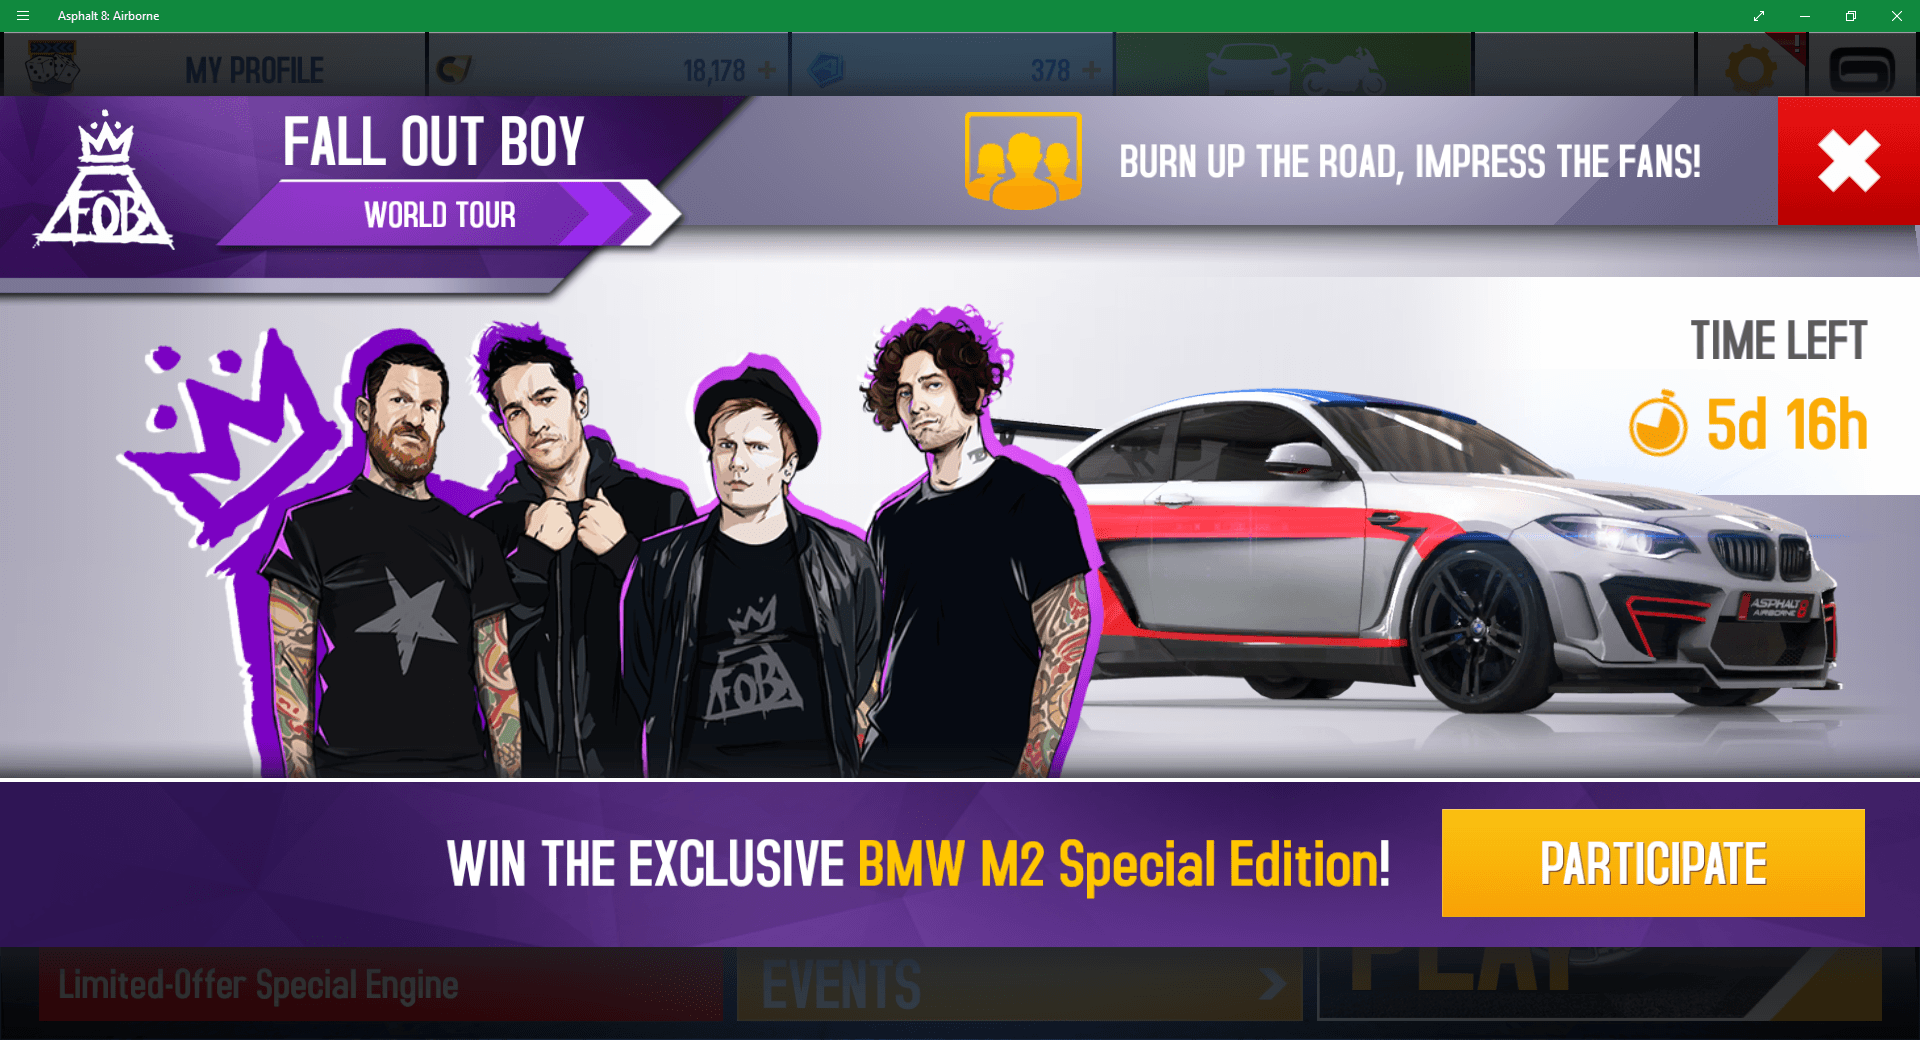 Featured Post Image - Fall Out Boy meets Asphalt 8: This ain’t a crossover, it’s a god damn car race.